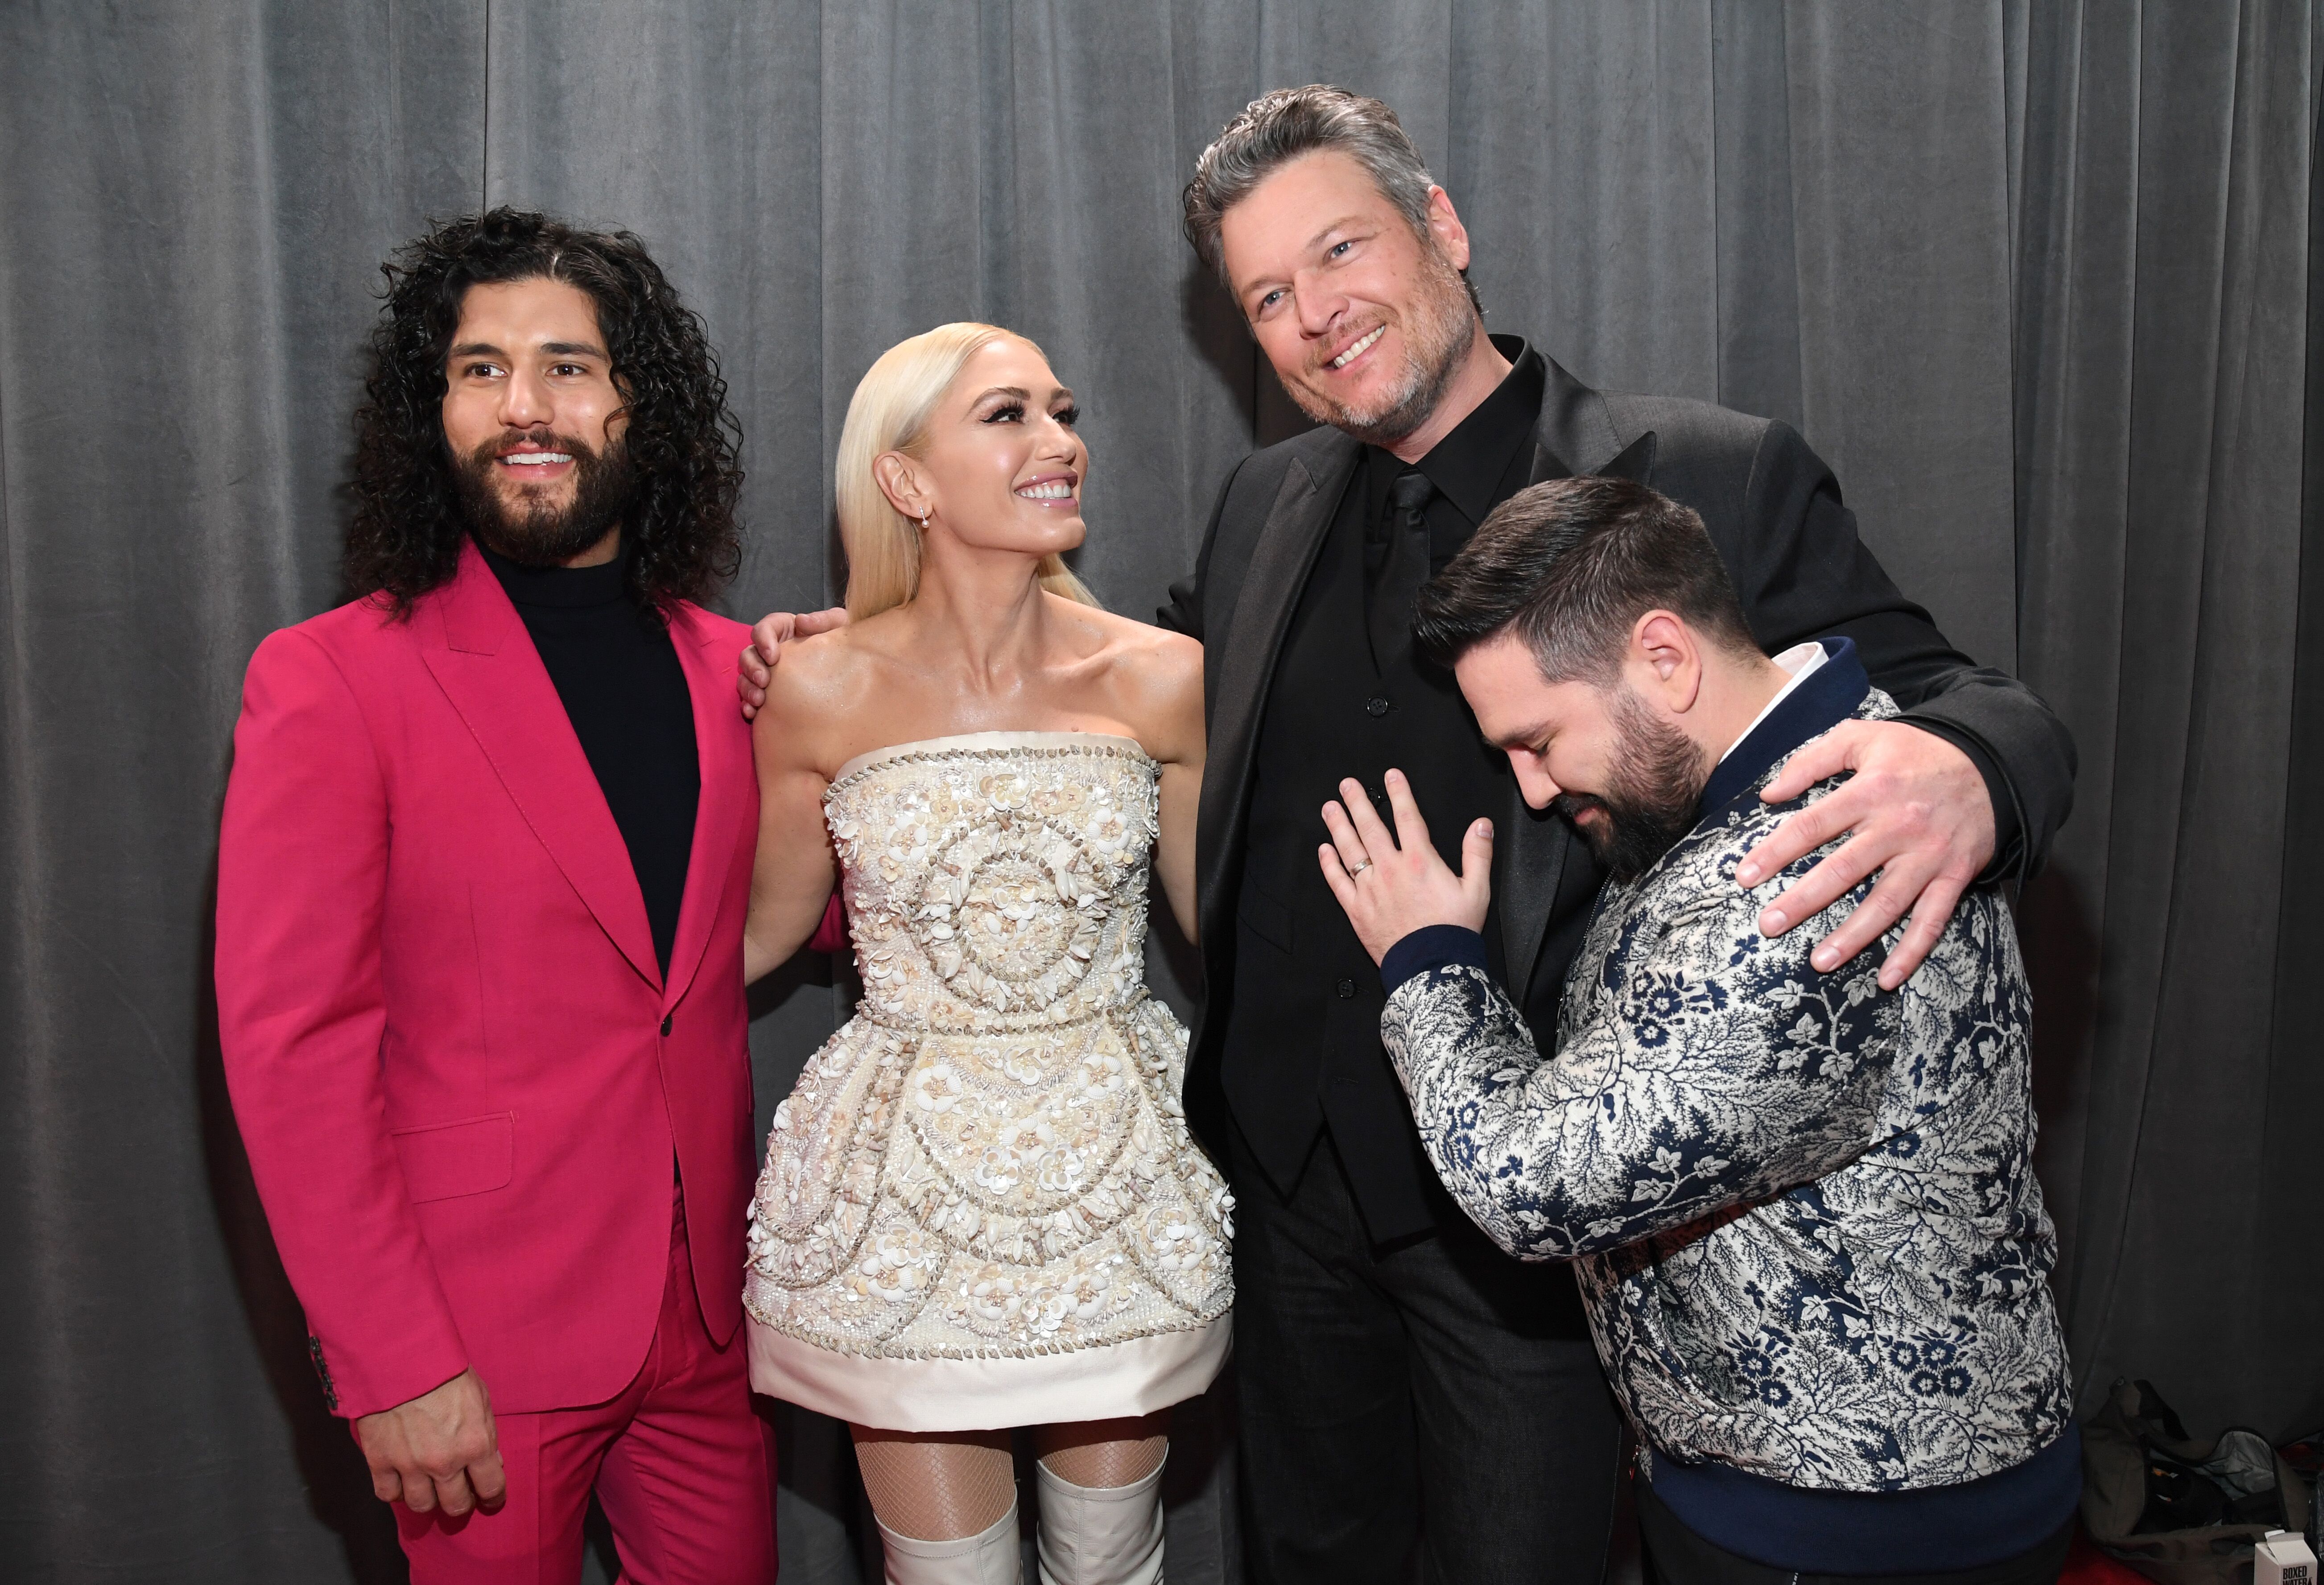 Dan Smyers, Gwen Stefani, Blake Shelton, and Shay Mooney at the 62nd Annual Grammy Awards on January 26, 2020, in Los Angeles, California | Photo: Kevin Mazur/Getty Images